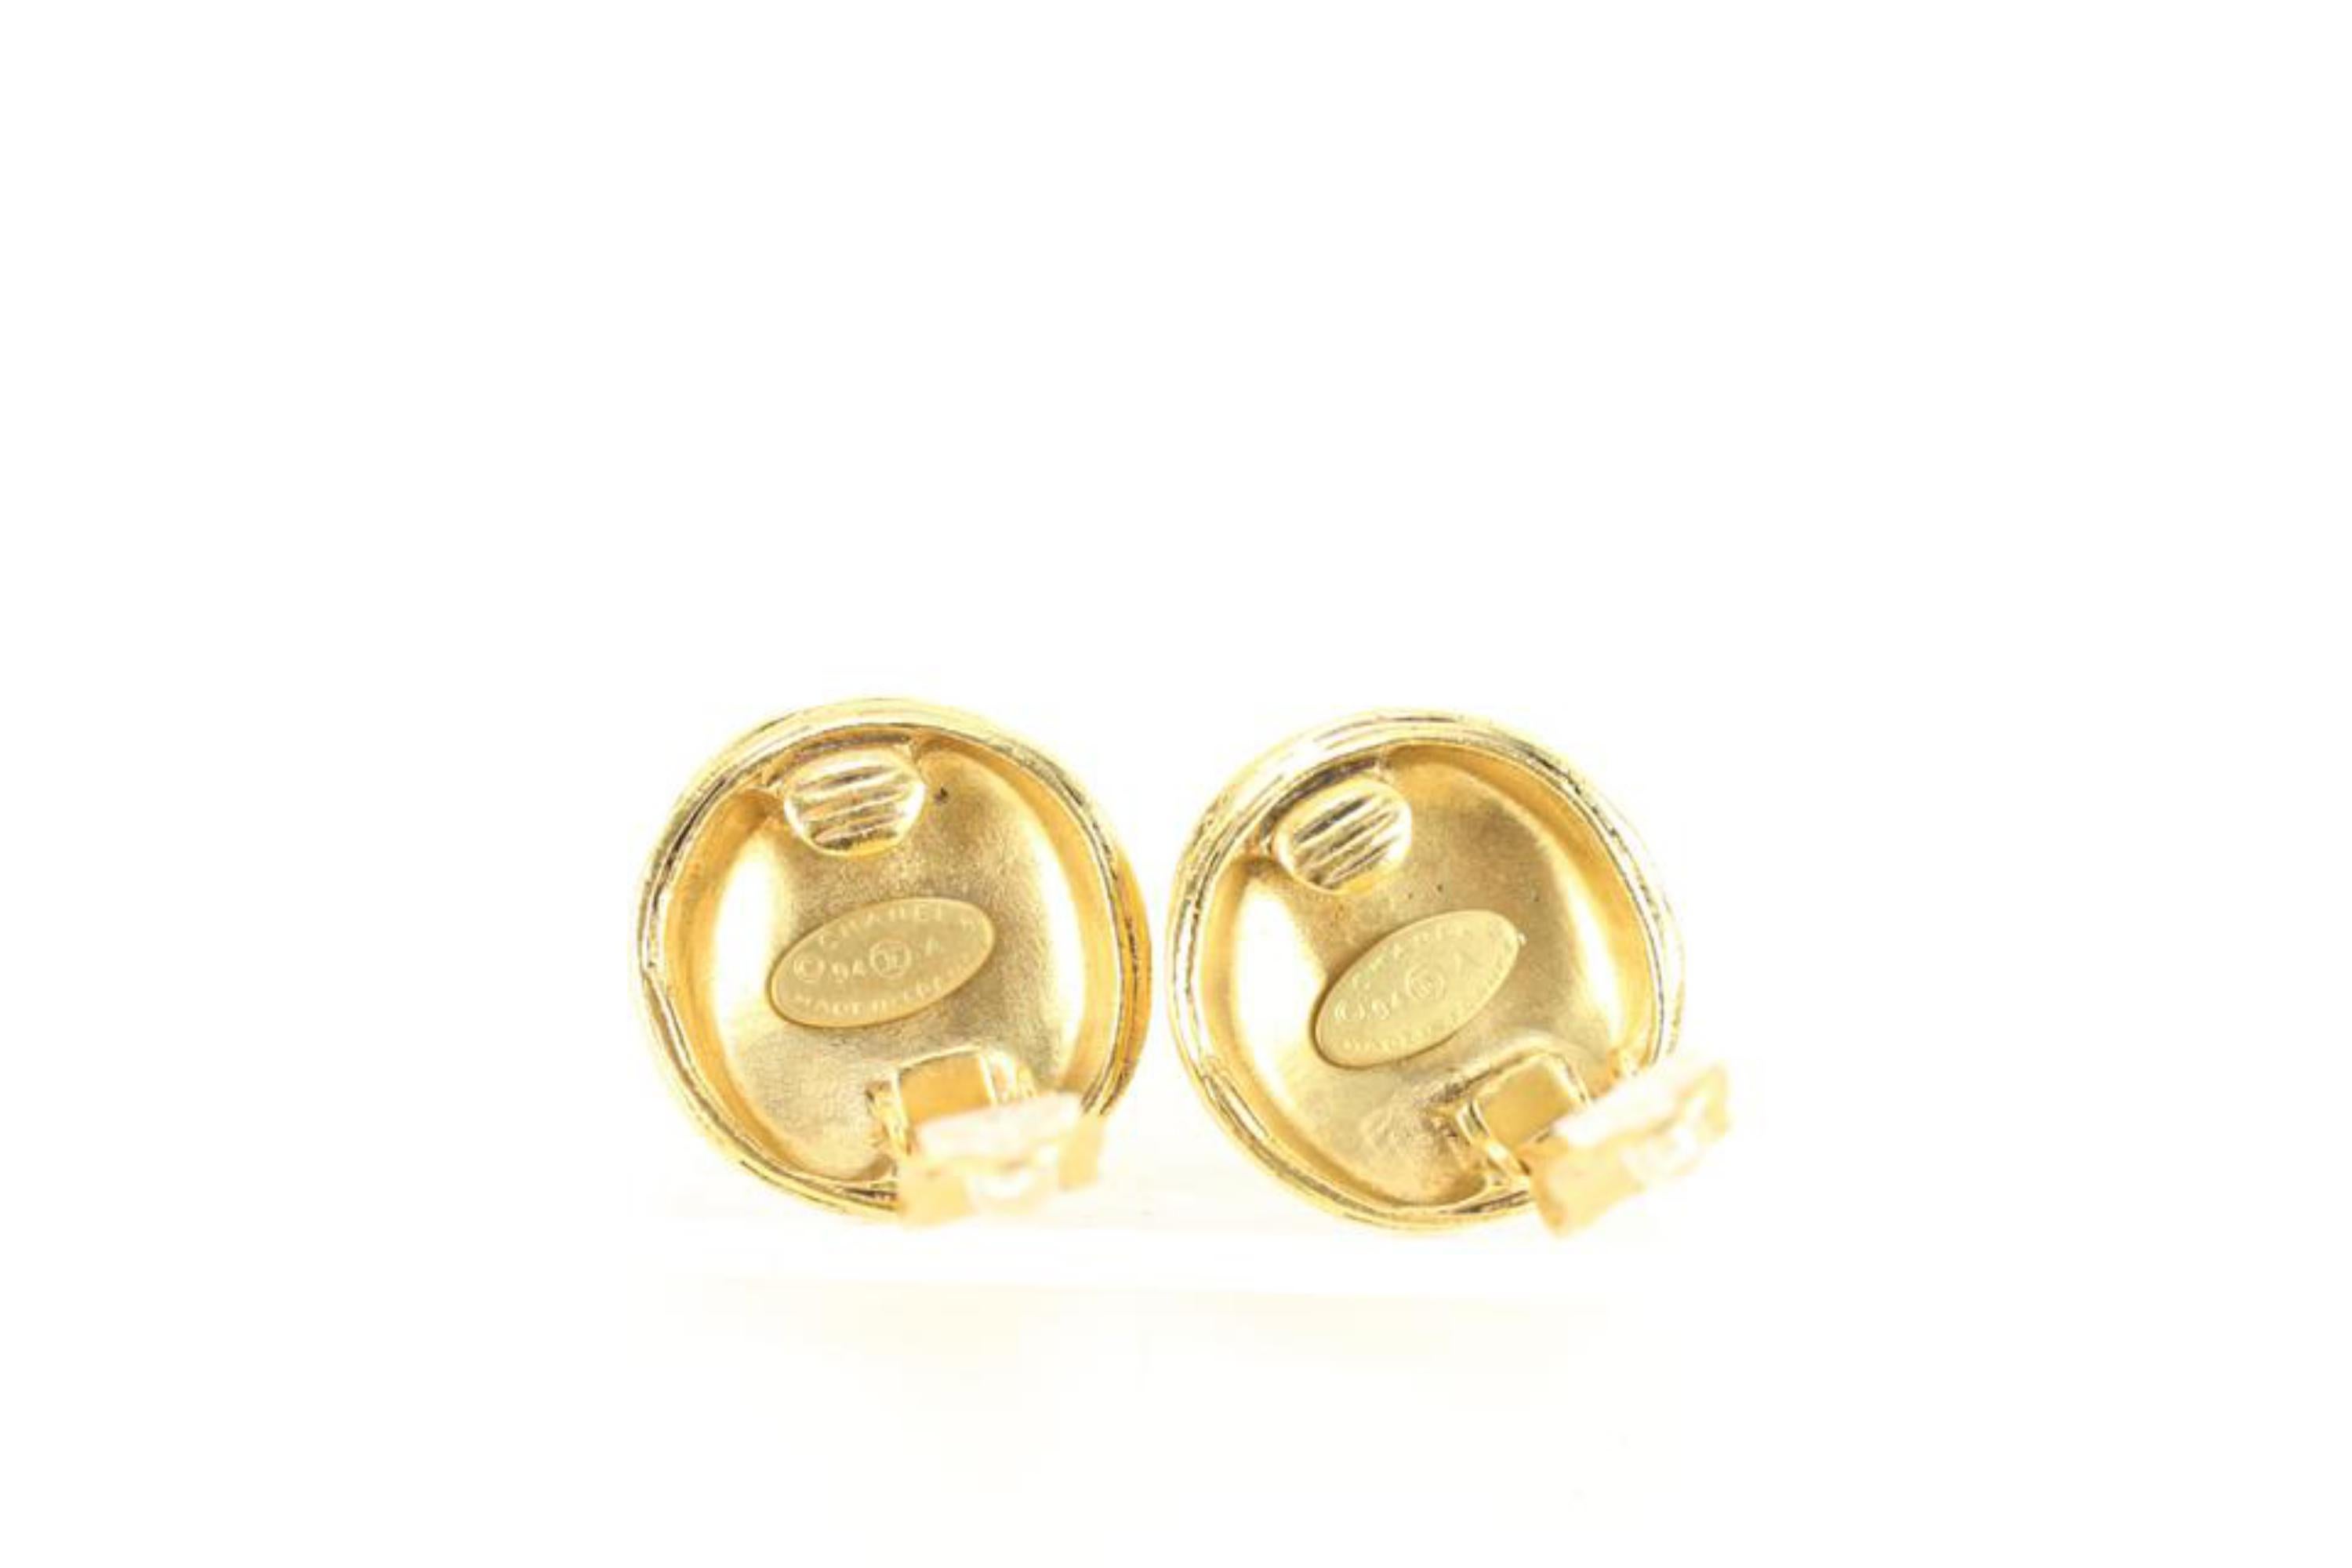 Chanel 94A Gold CC Spiral Earrings 1ck616s 3